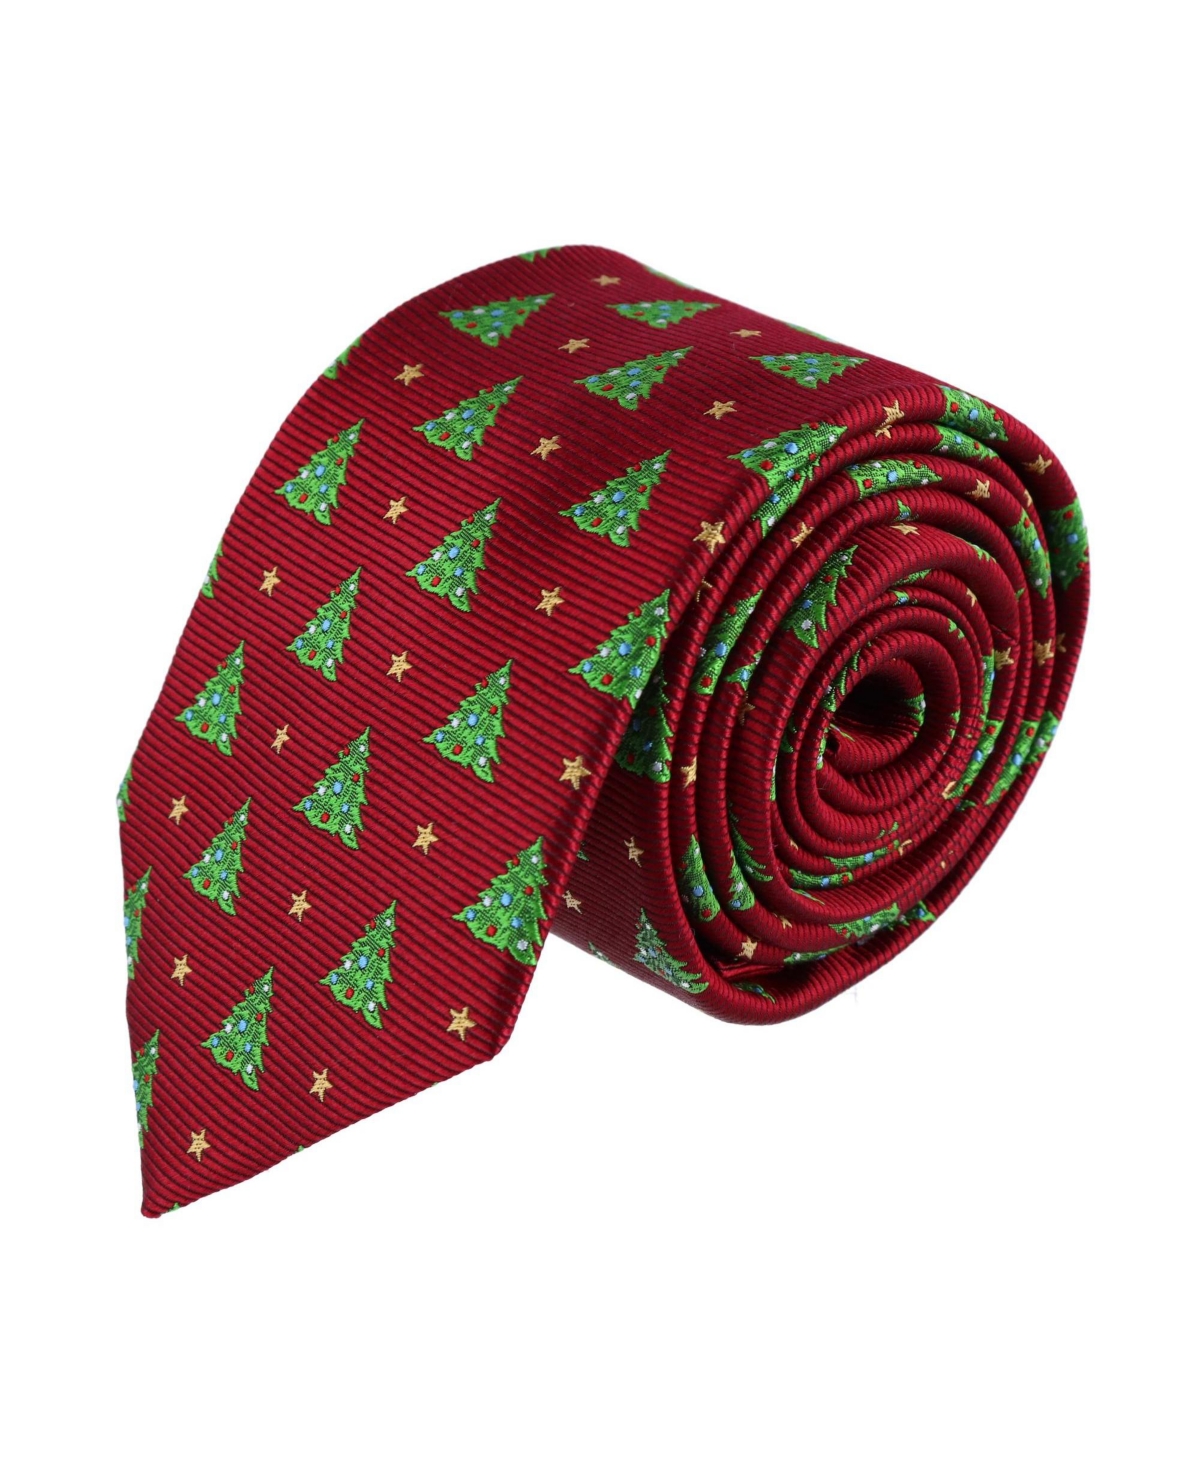 Oh Christmas Tree Novelty Silk Necktie - Red